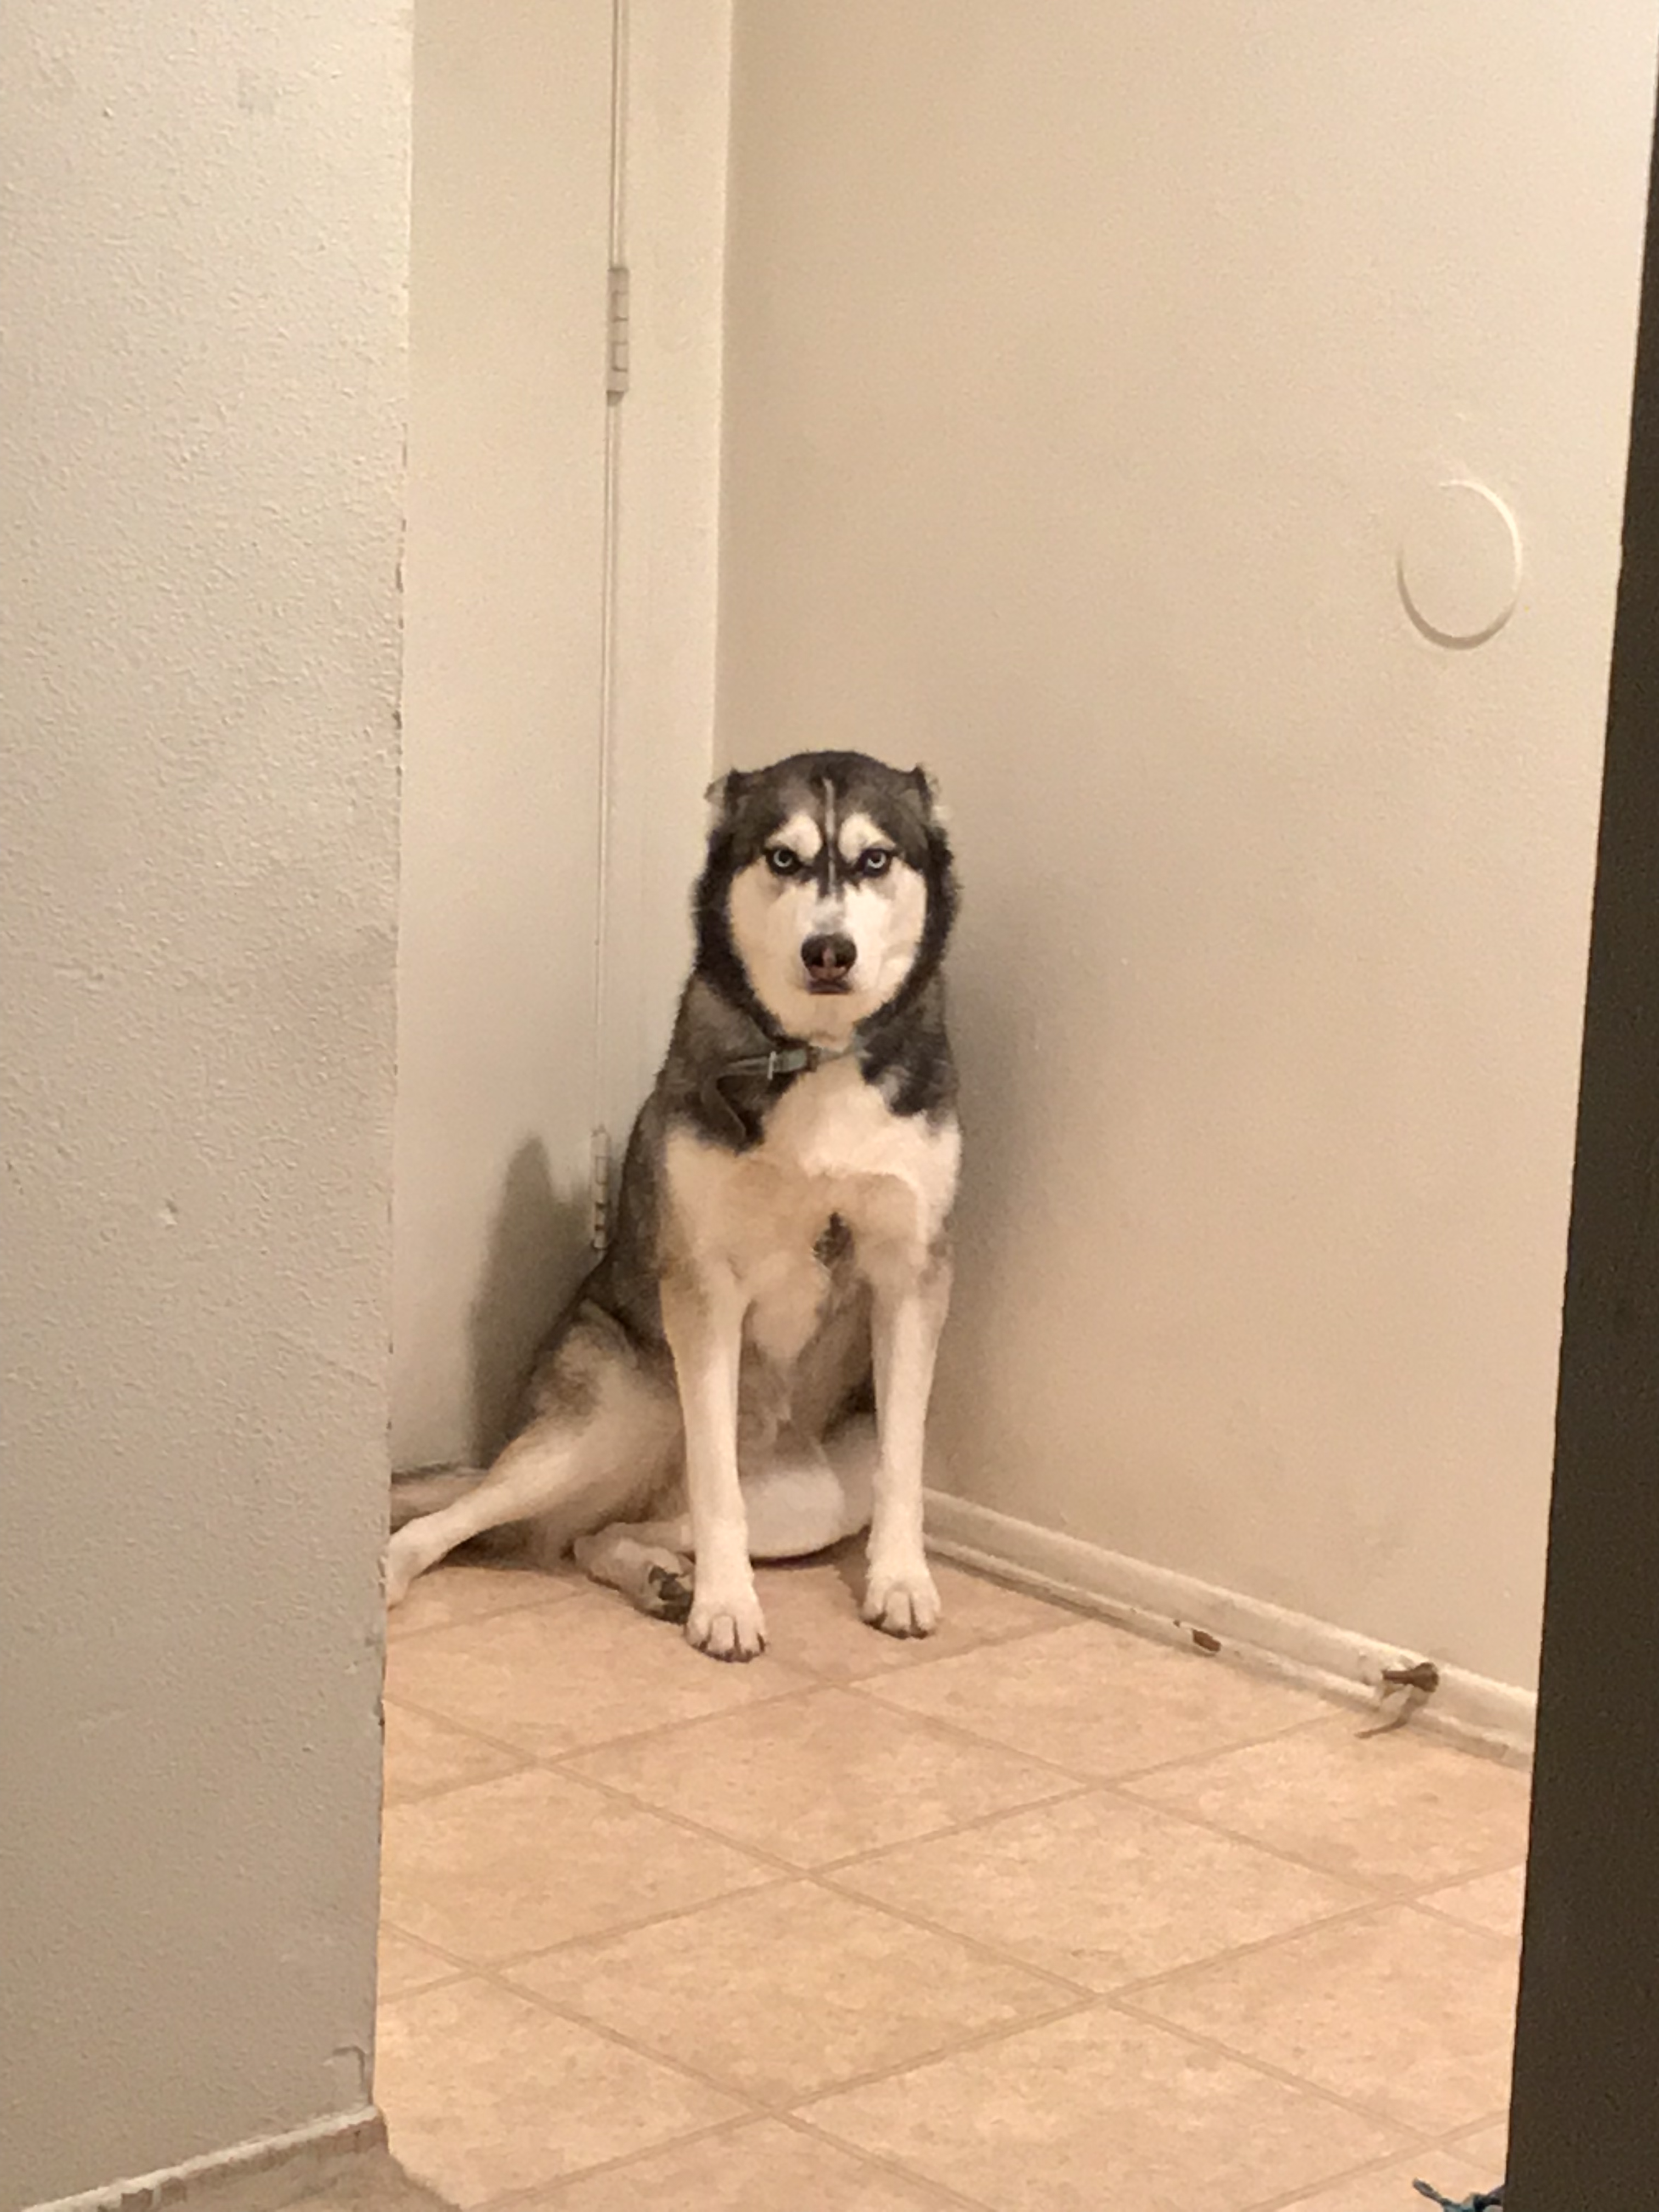 A black and white husky in a corner with a guilty look on her face.